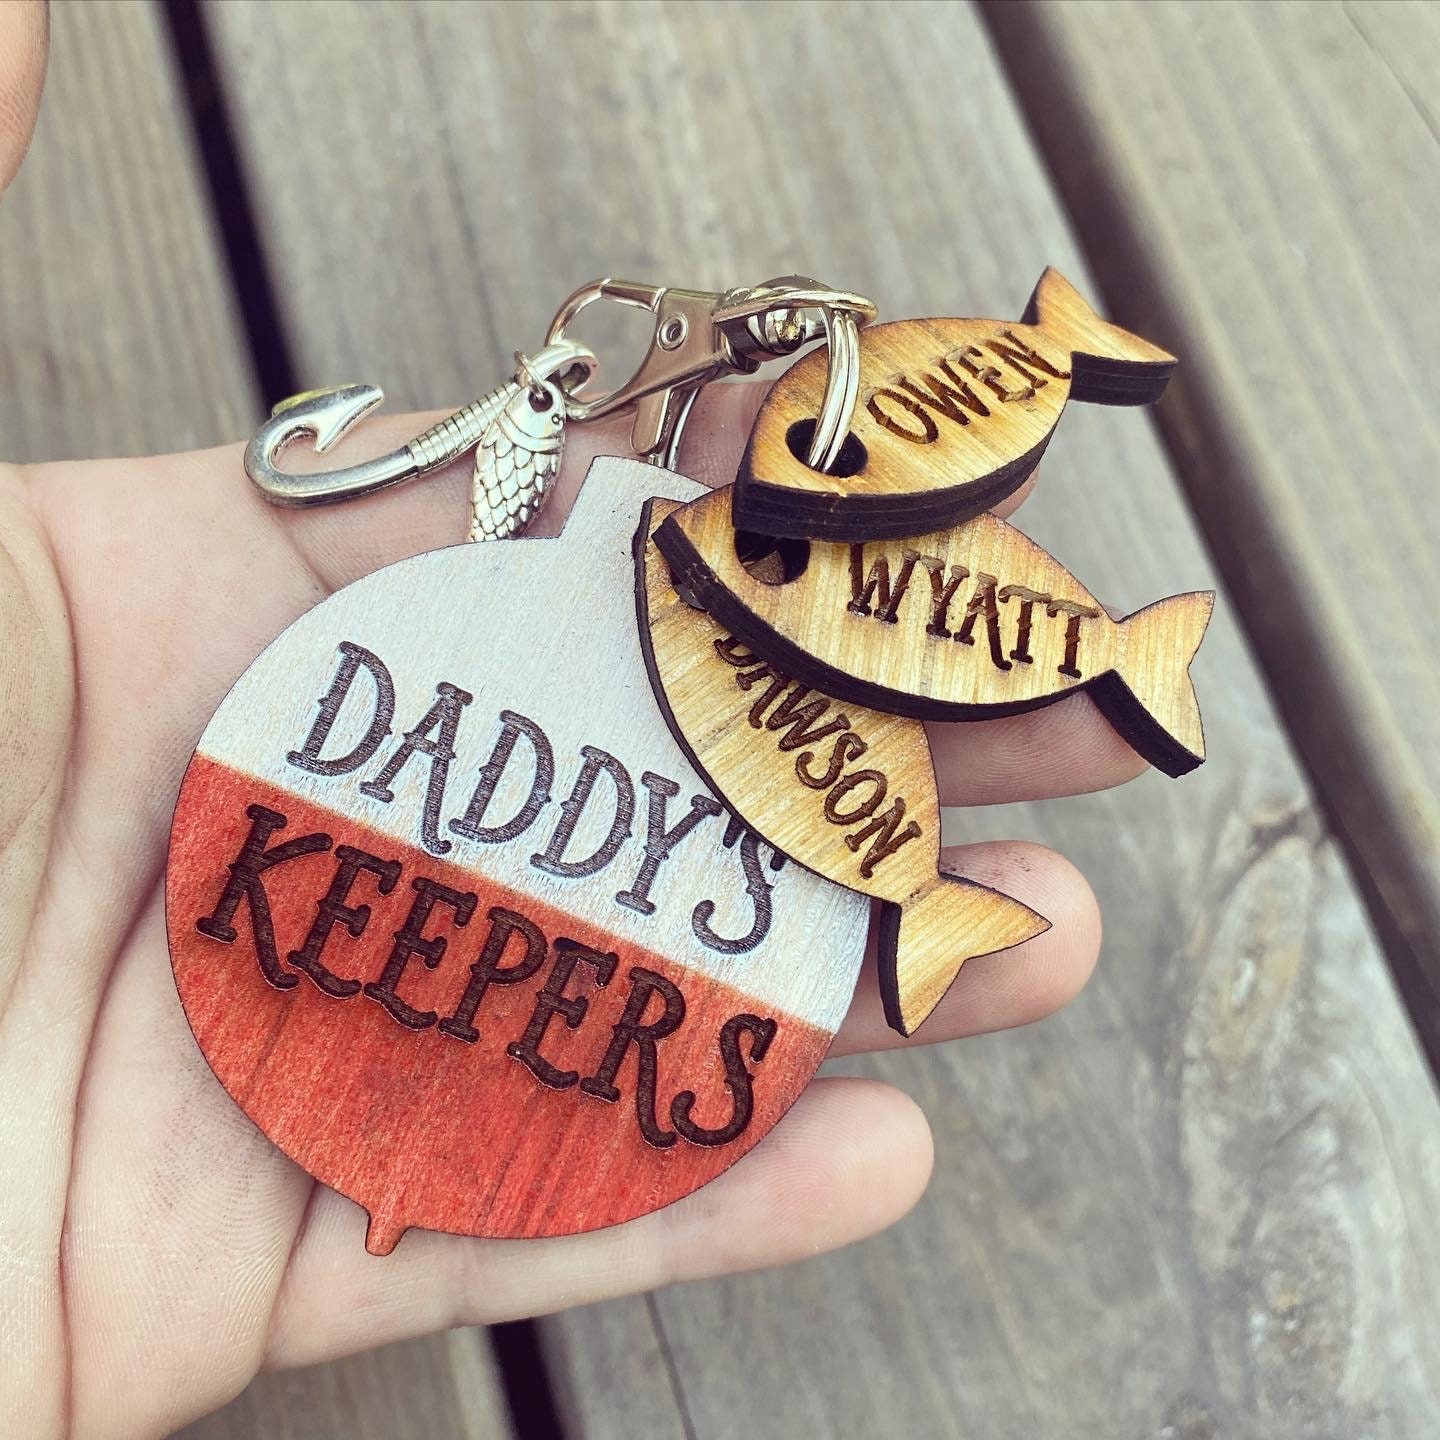 Fishing Gifts For Men - Fishing Gifts - Fathers Day Fishing Gifts For Dad,  Husband, Boyfriend - Birt…See more Fishing Gifts For Men - Fishing Gifts 